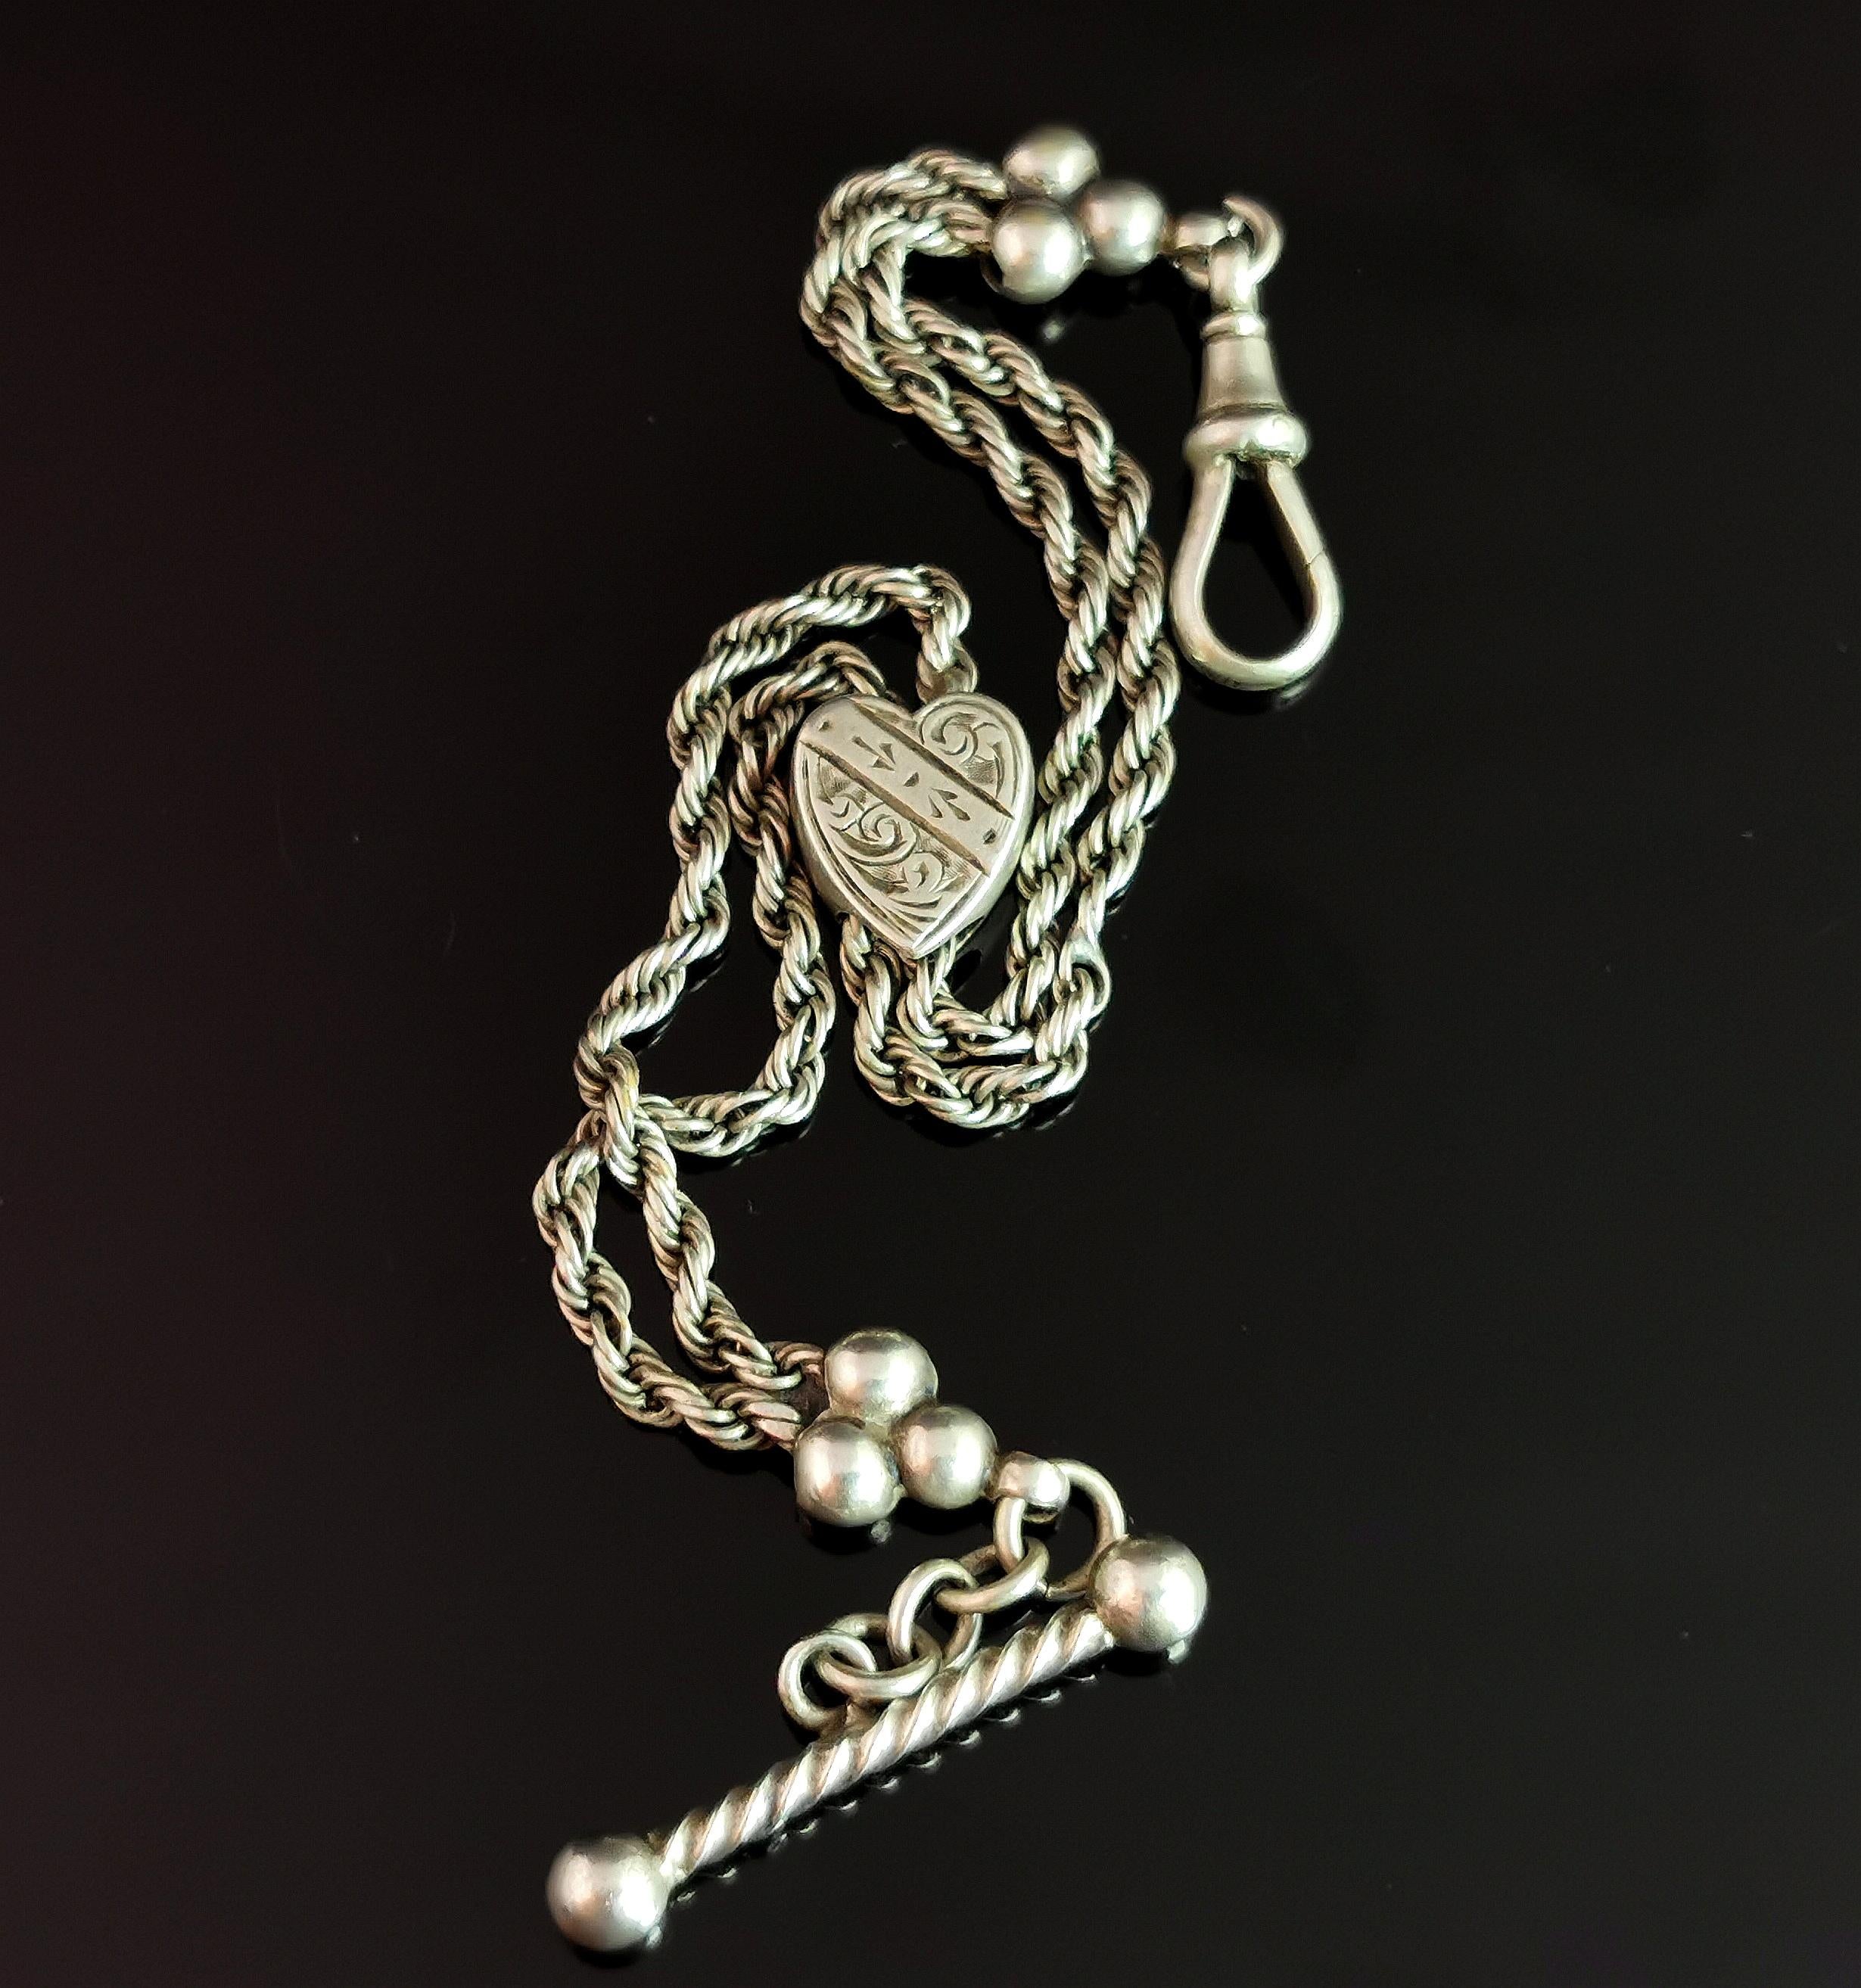 A beautiful antique Victorian era, sterling silver albertina chain.

It is a double rope chain with a twist detail t bar to one end a dog clip fastener to the other, these are shouldered by a sterling silver trefoil bead.

The chain has a pretty